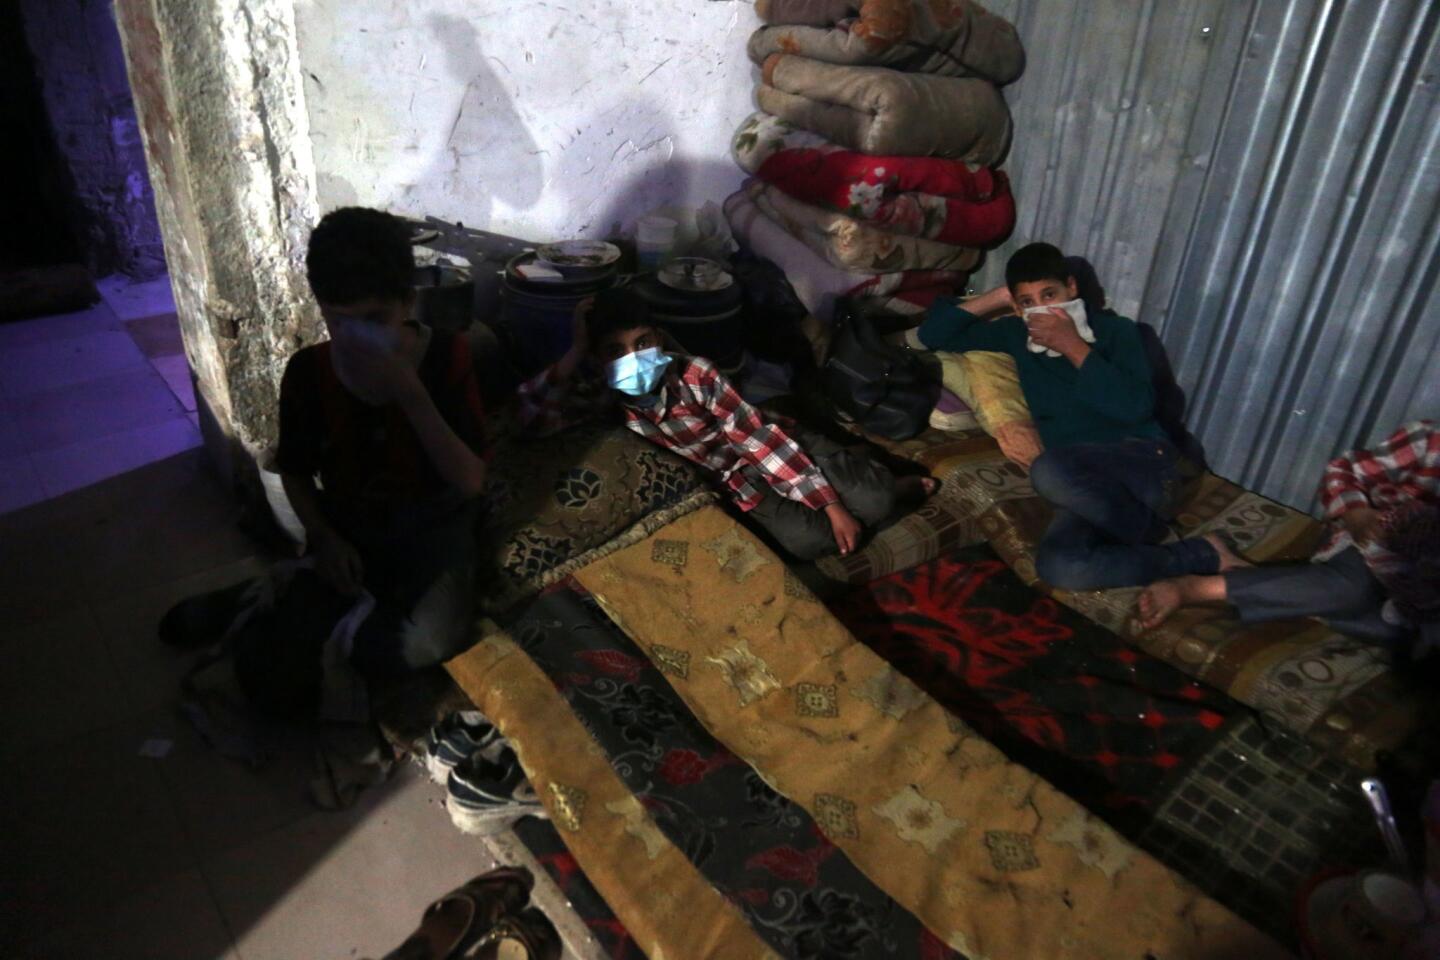 Injured victims of an alleged chemical attack rest in rebels-held Douma, Syria, on April 8, 2018. According to media and local reports, at least 70 people died after a helicopter dropped a barrel bomb allegedly containing Sarin gas, a nerve toxin that kills within minutes of direct inhalation unless treated quickly with an antidote.